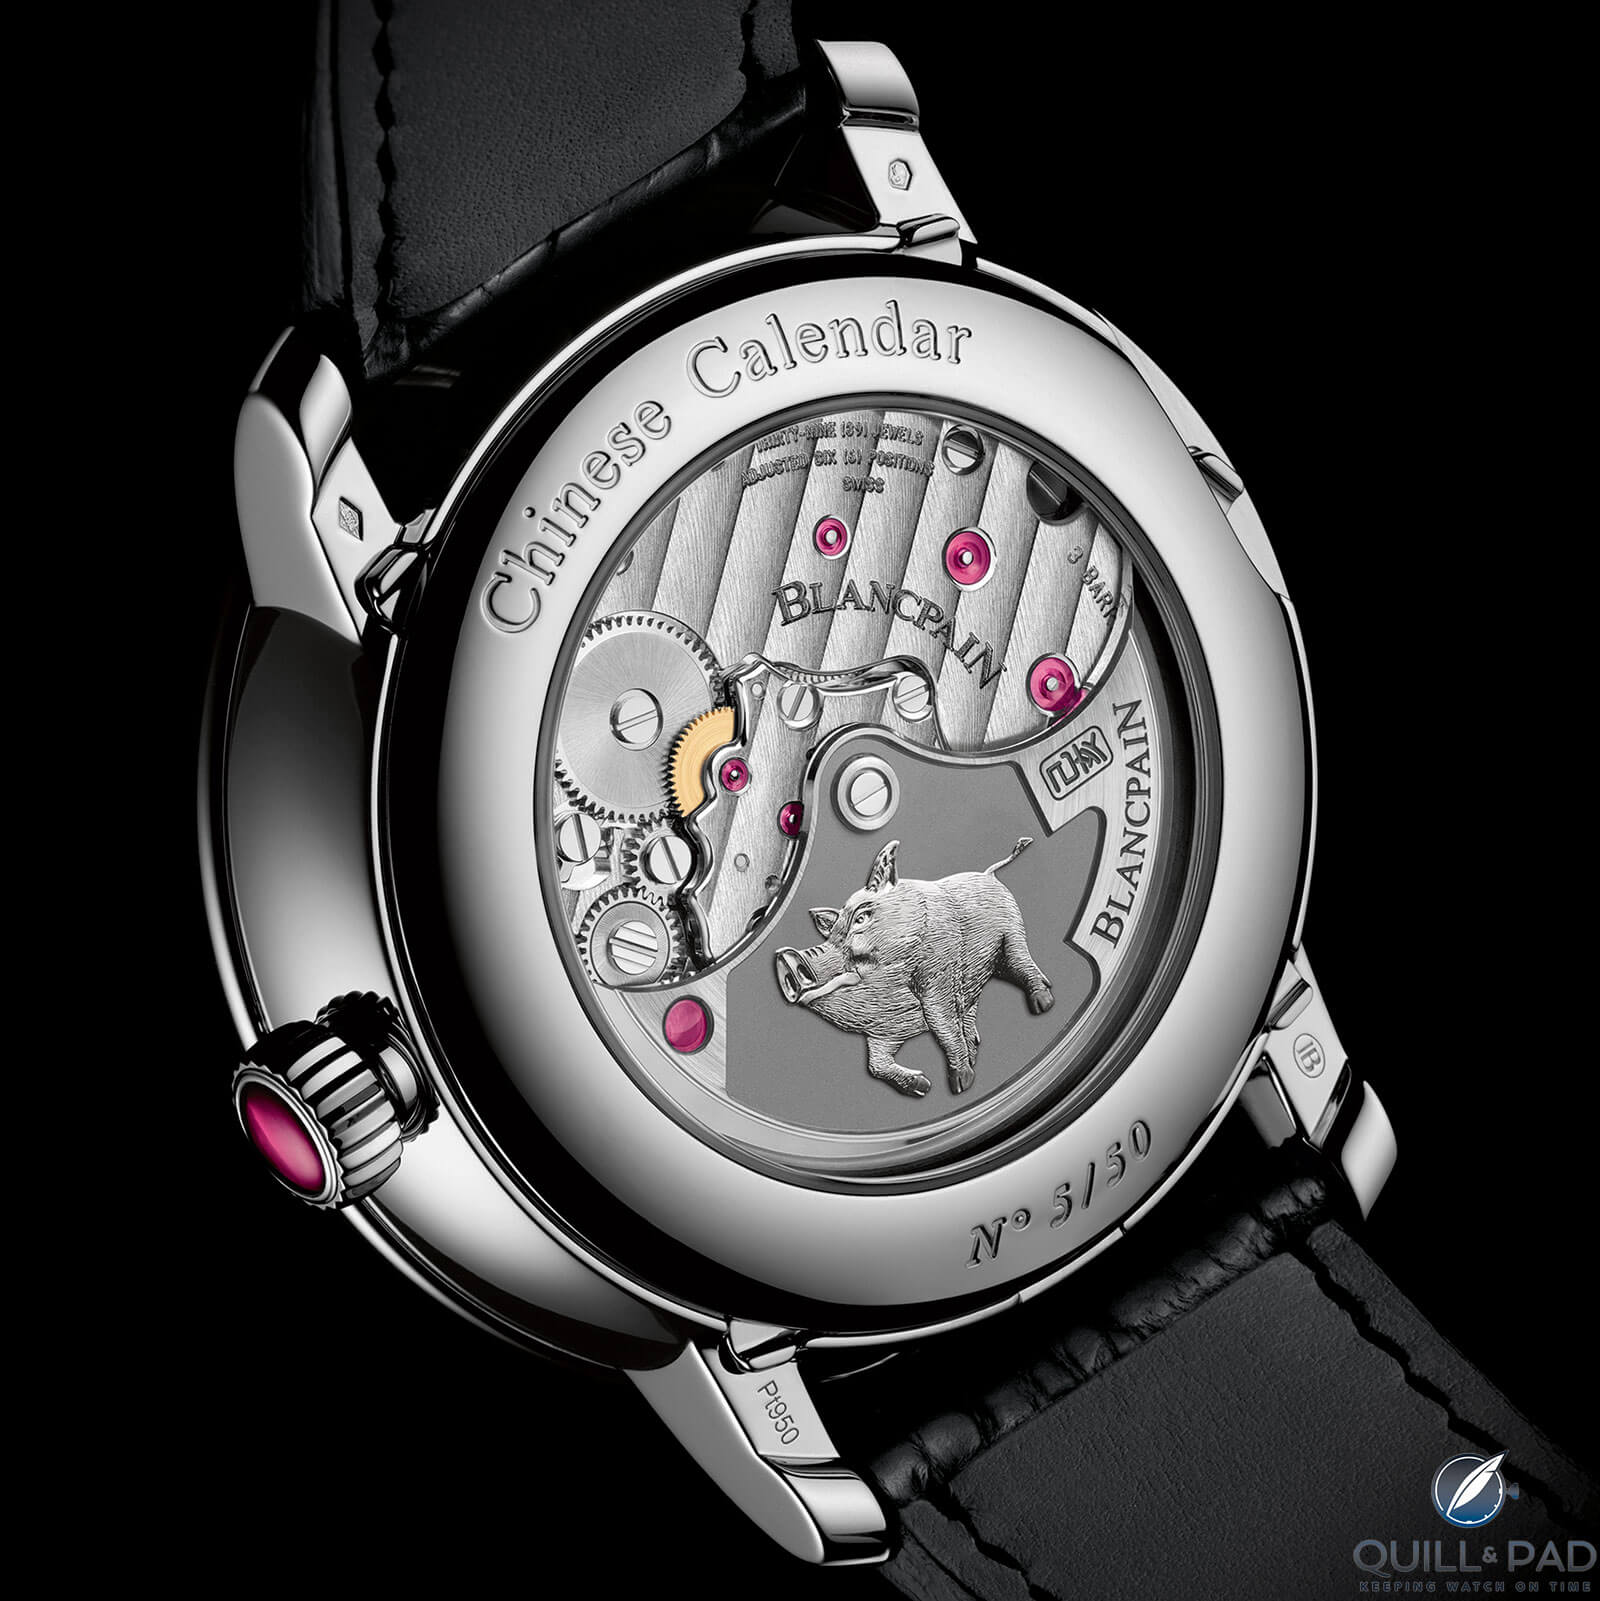 Engraved pig on the automatic winding rotor visible through the display back of the Blancpain Villeret Traditional Chinese Calendar